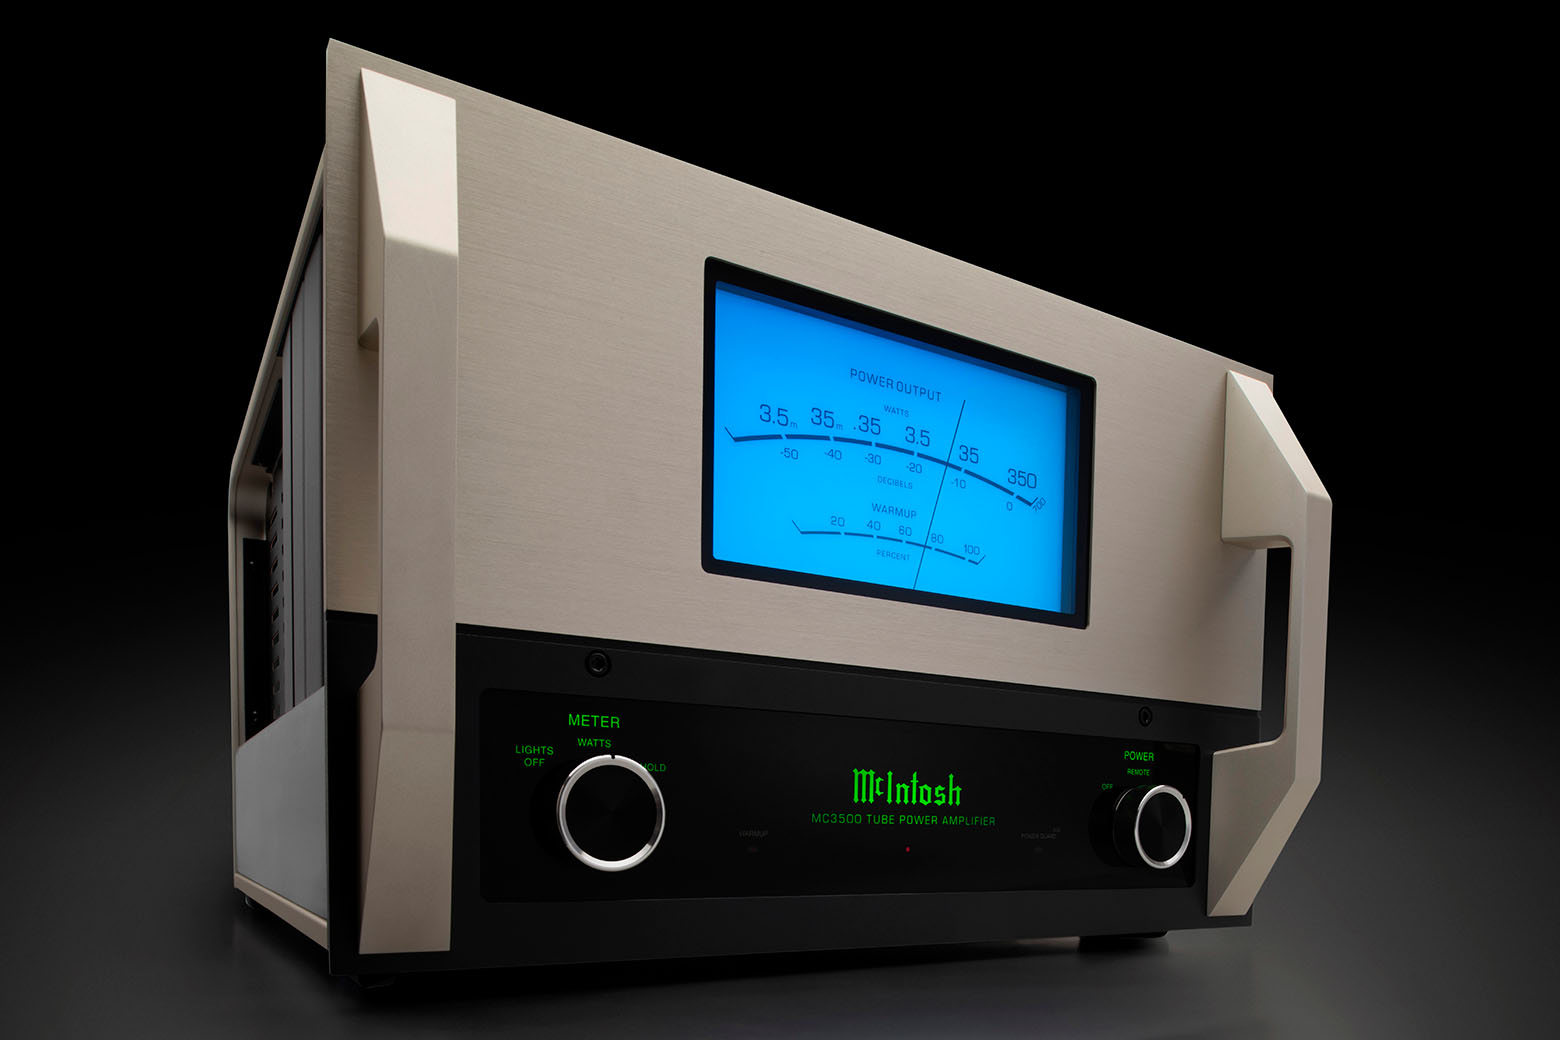 The McIntosh MC3500 has arrived at Fidelis and they sound awesome!